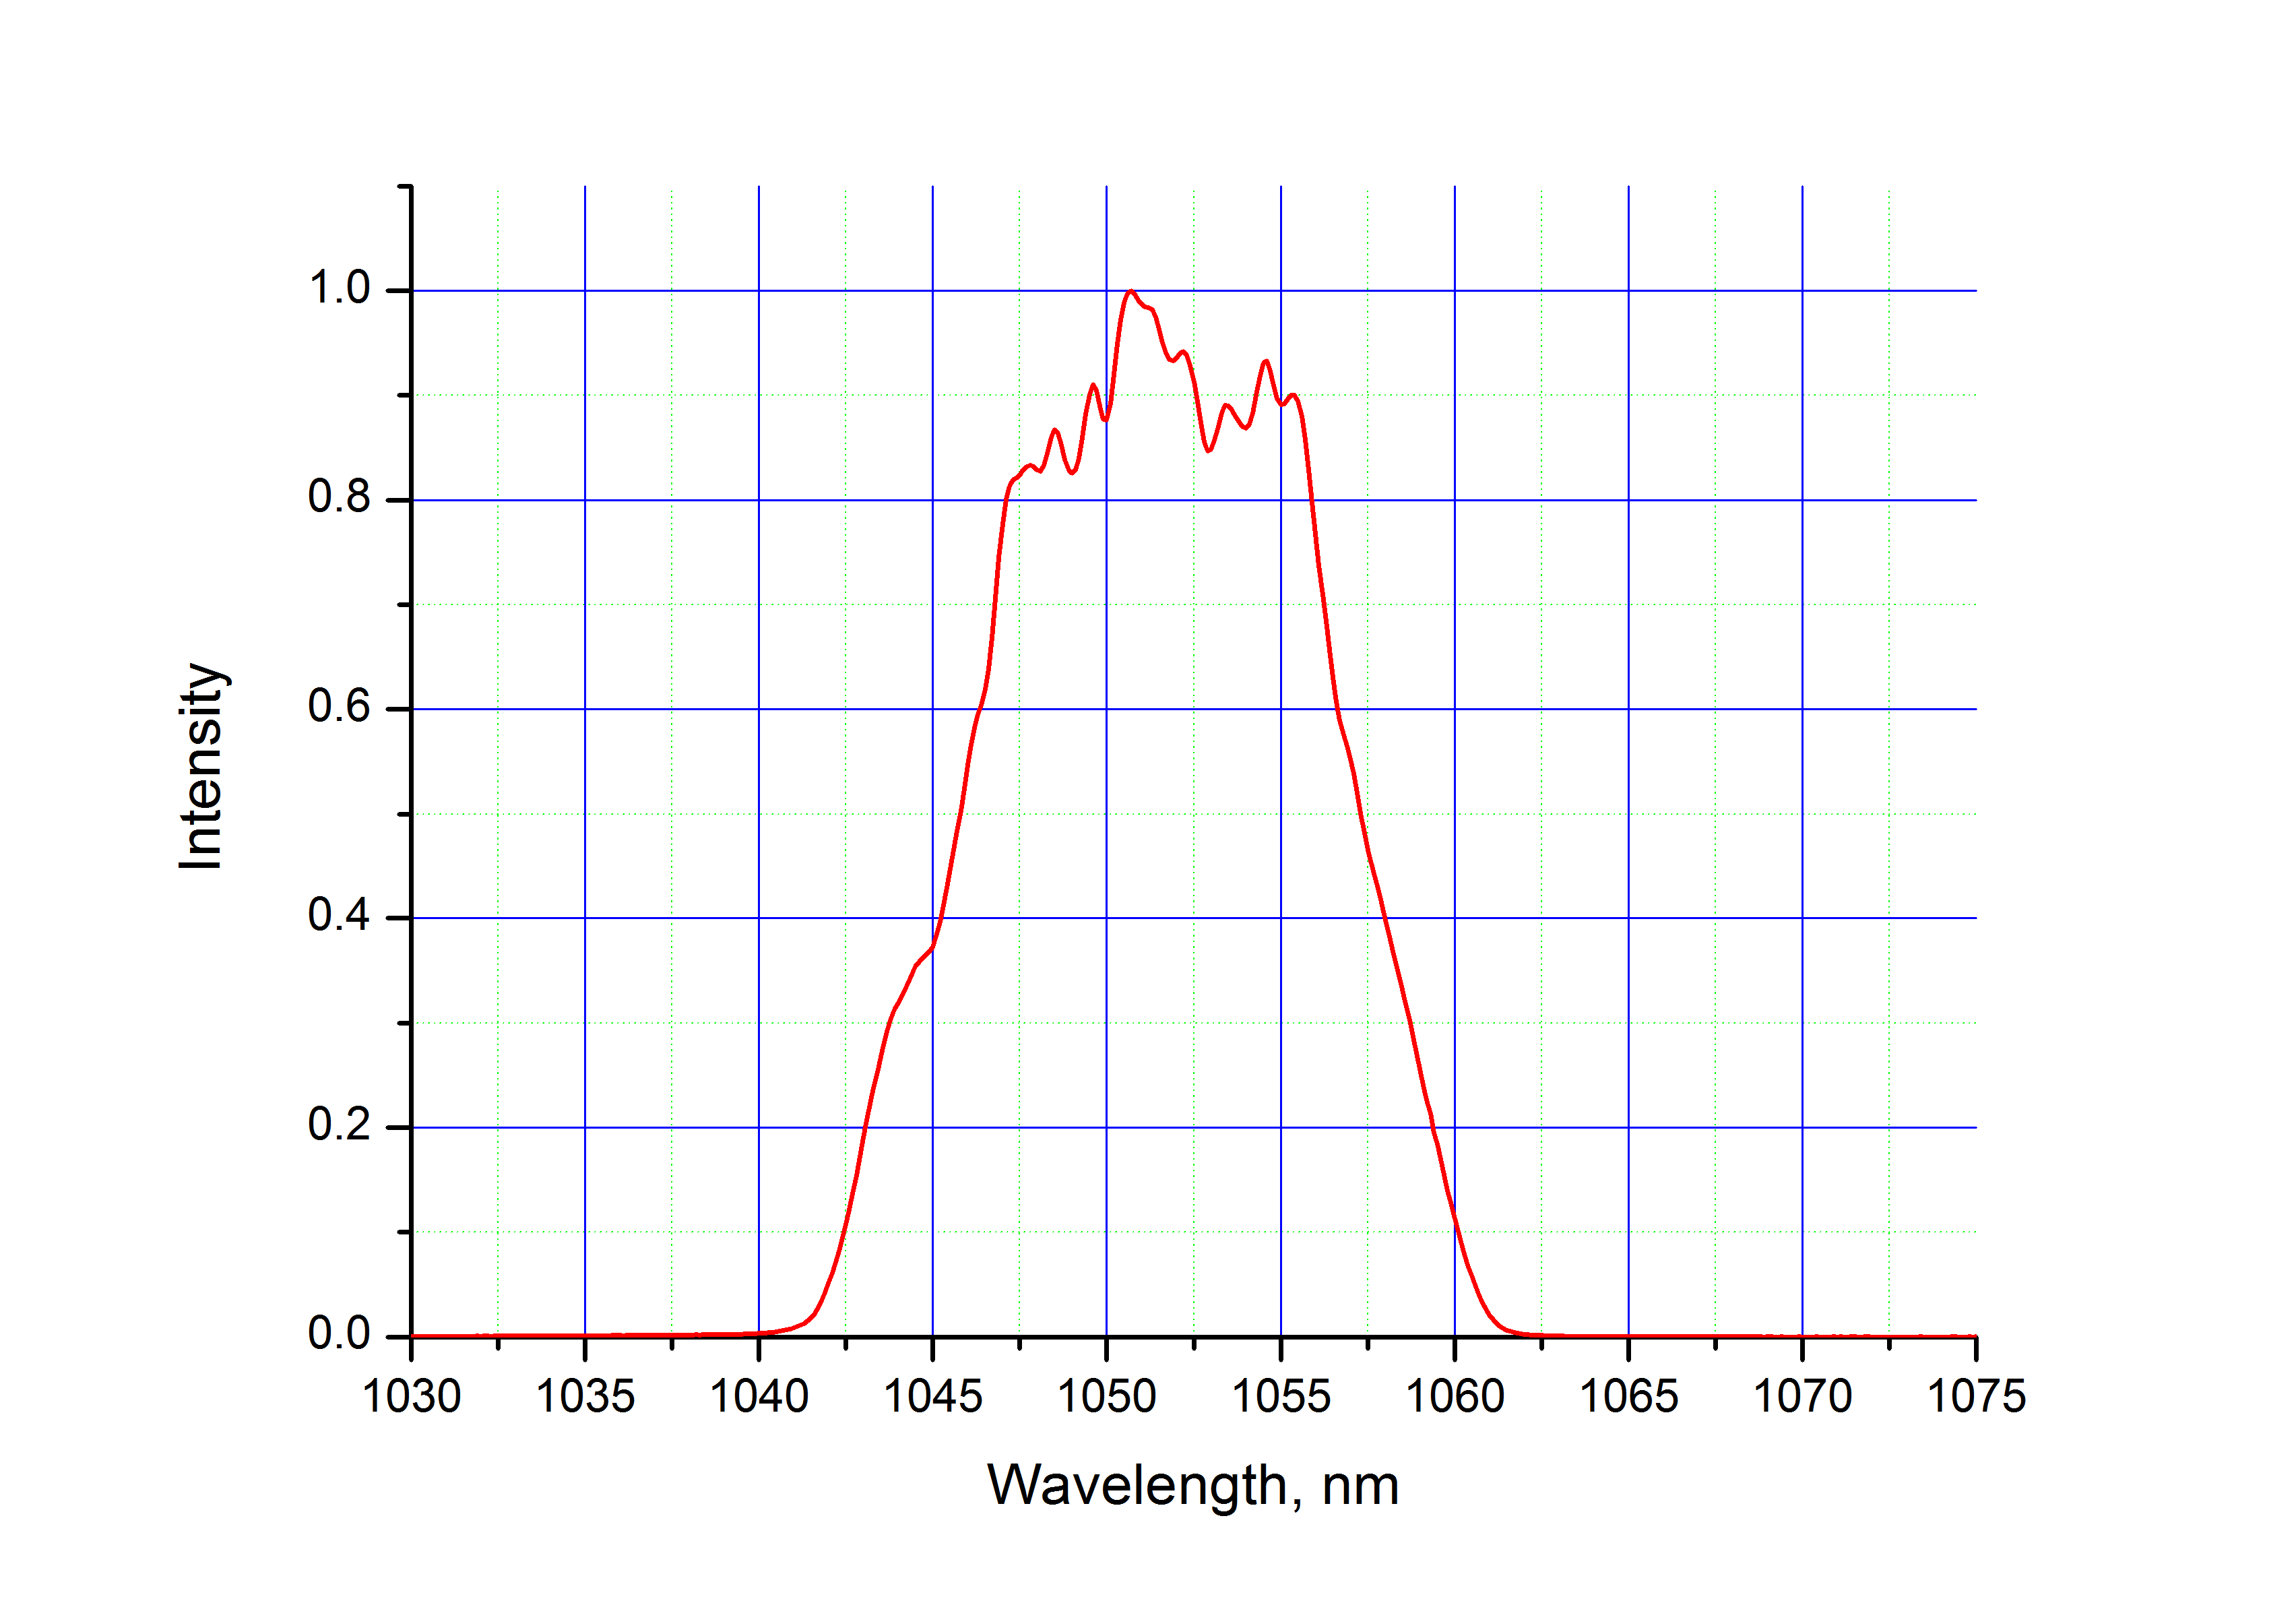 Typical spectrum of a customized ANTAUS system with 1050 nm output